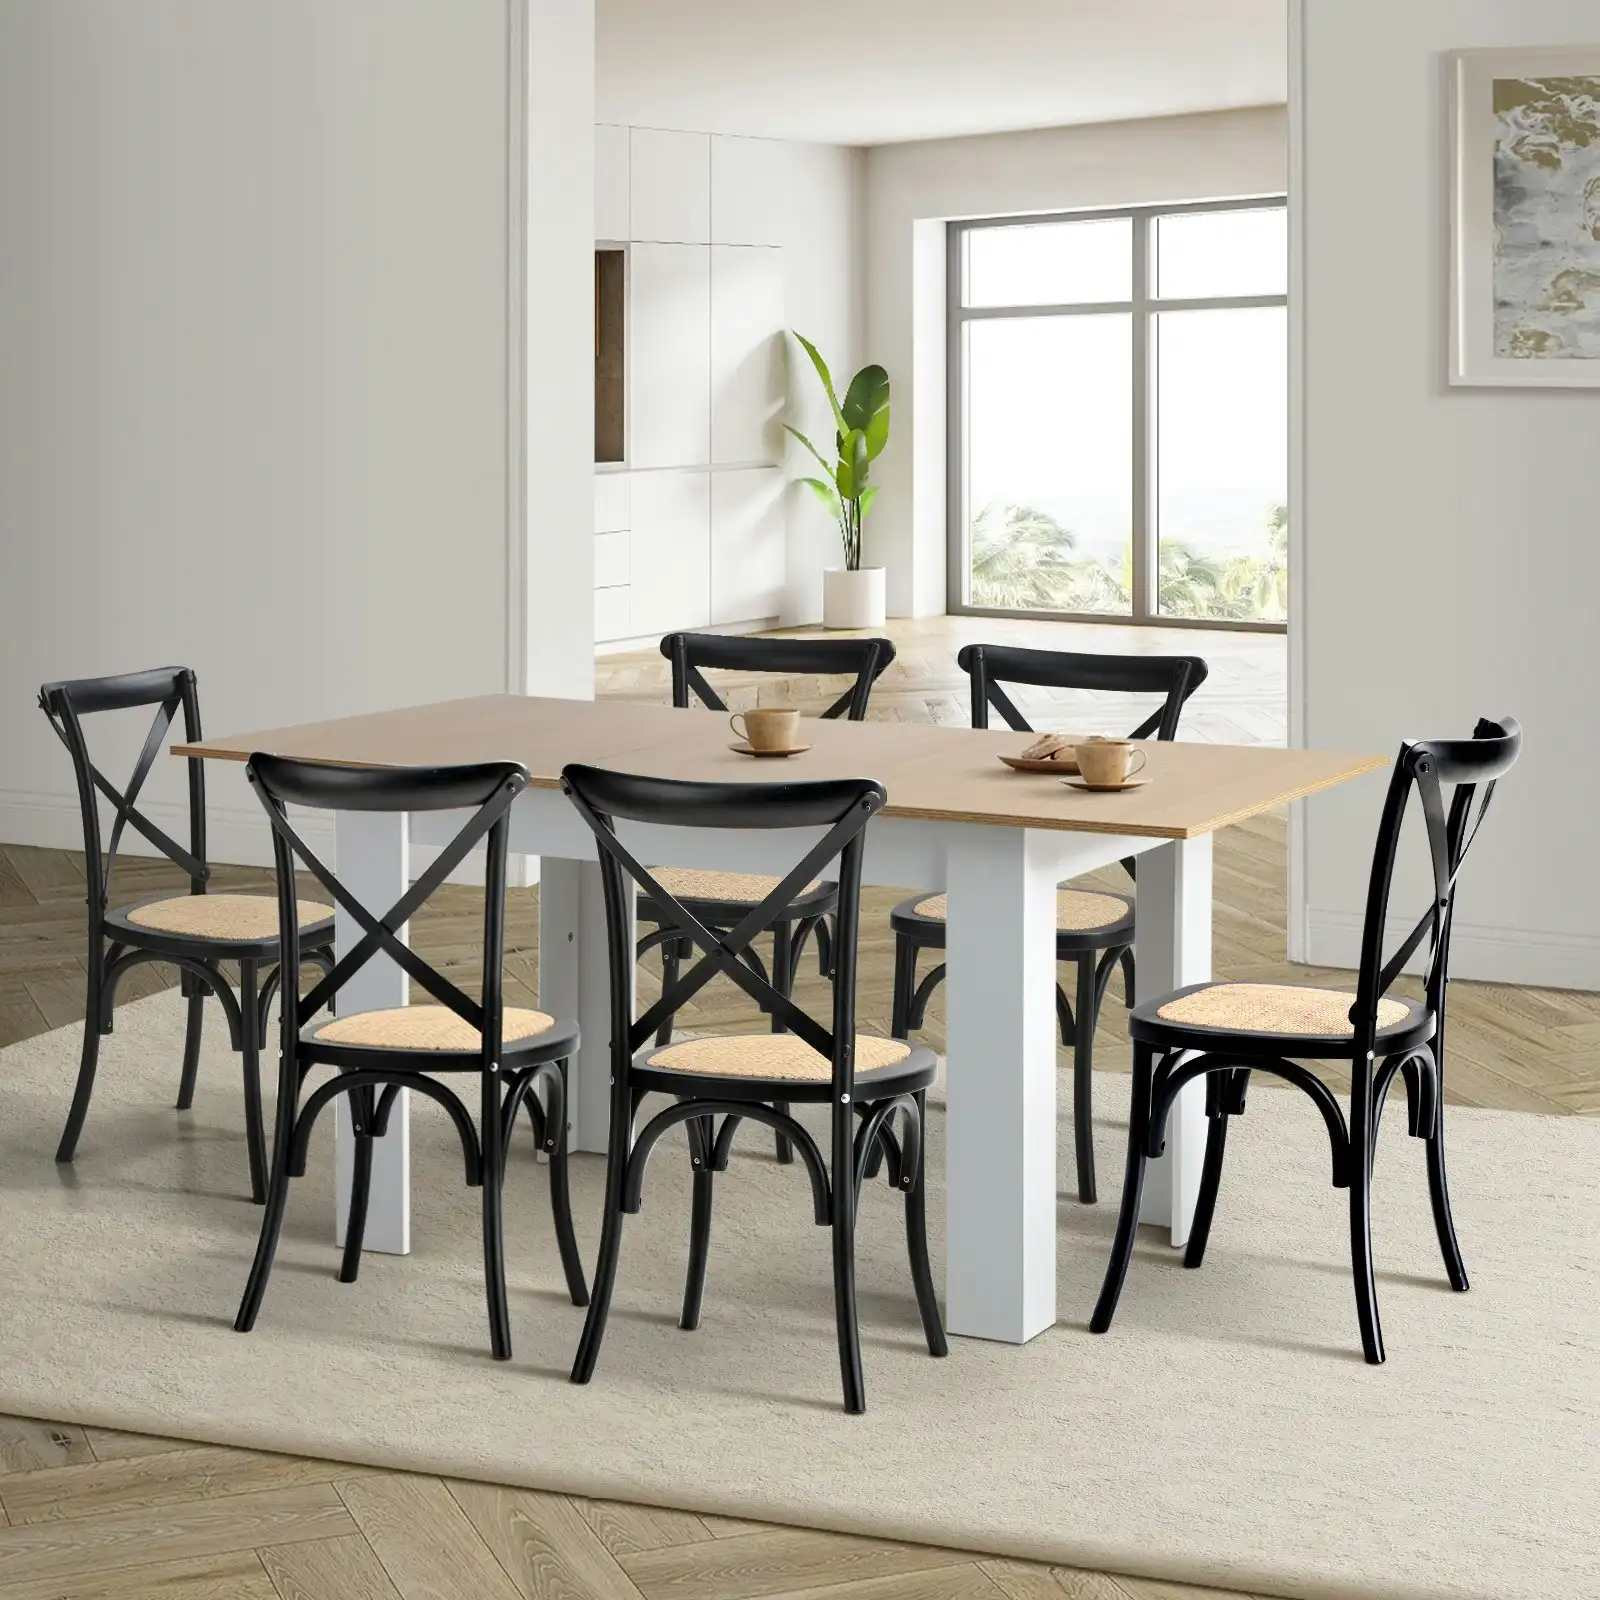 Oikiture 160cm Extendable Dining Table with 6PCS Dining Chairs Crossback Black